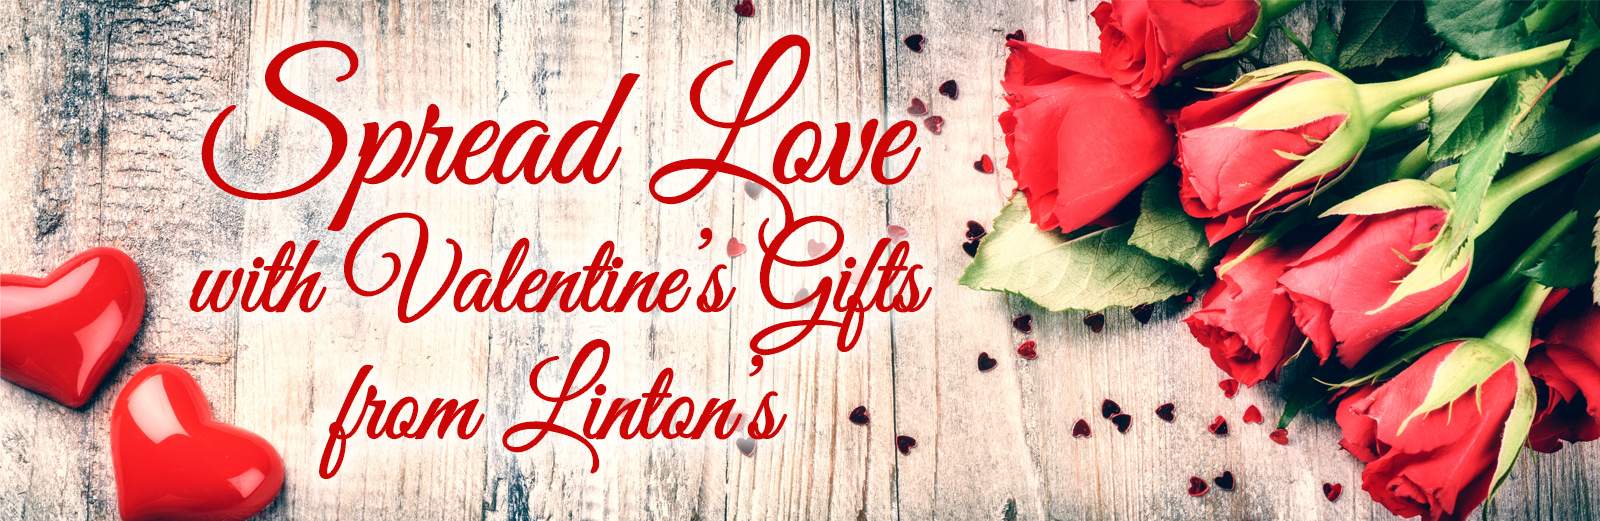 Spread Love with Valentine's Gifts from Linton's